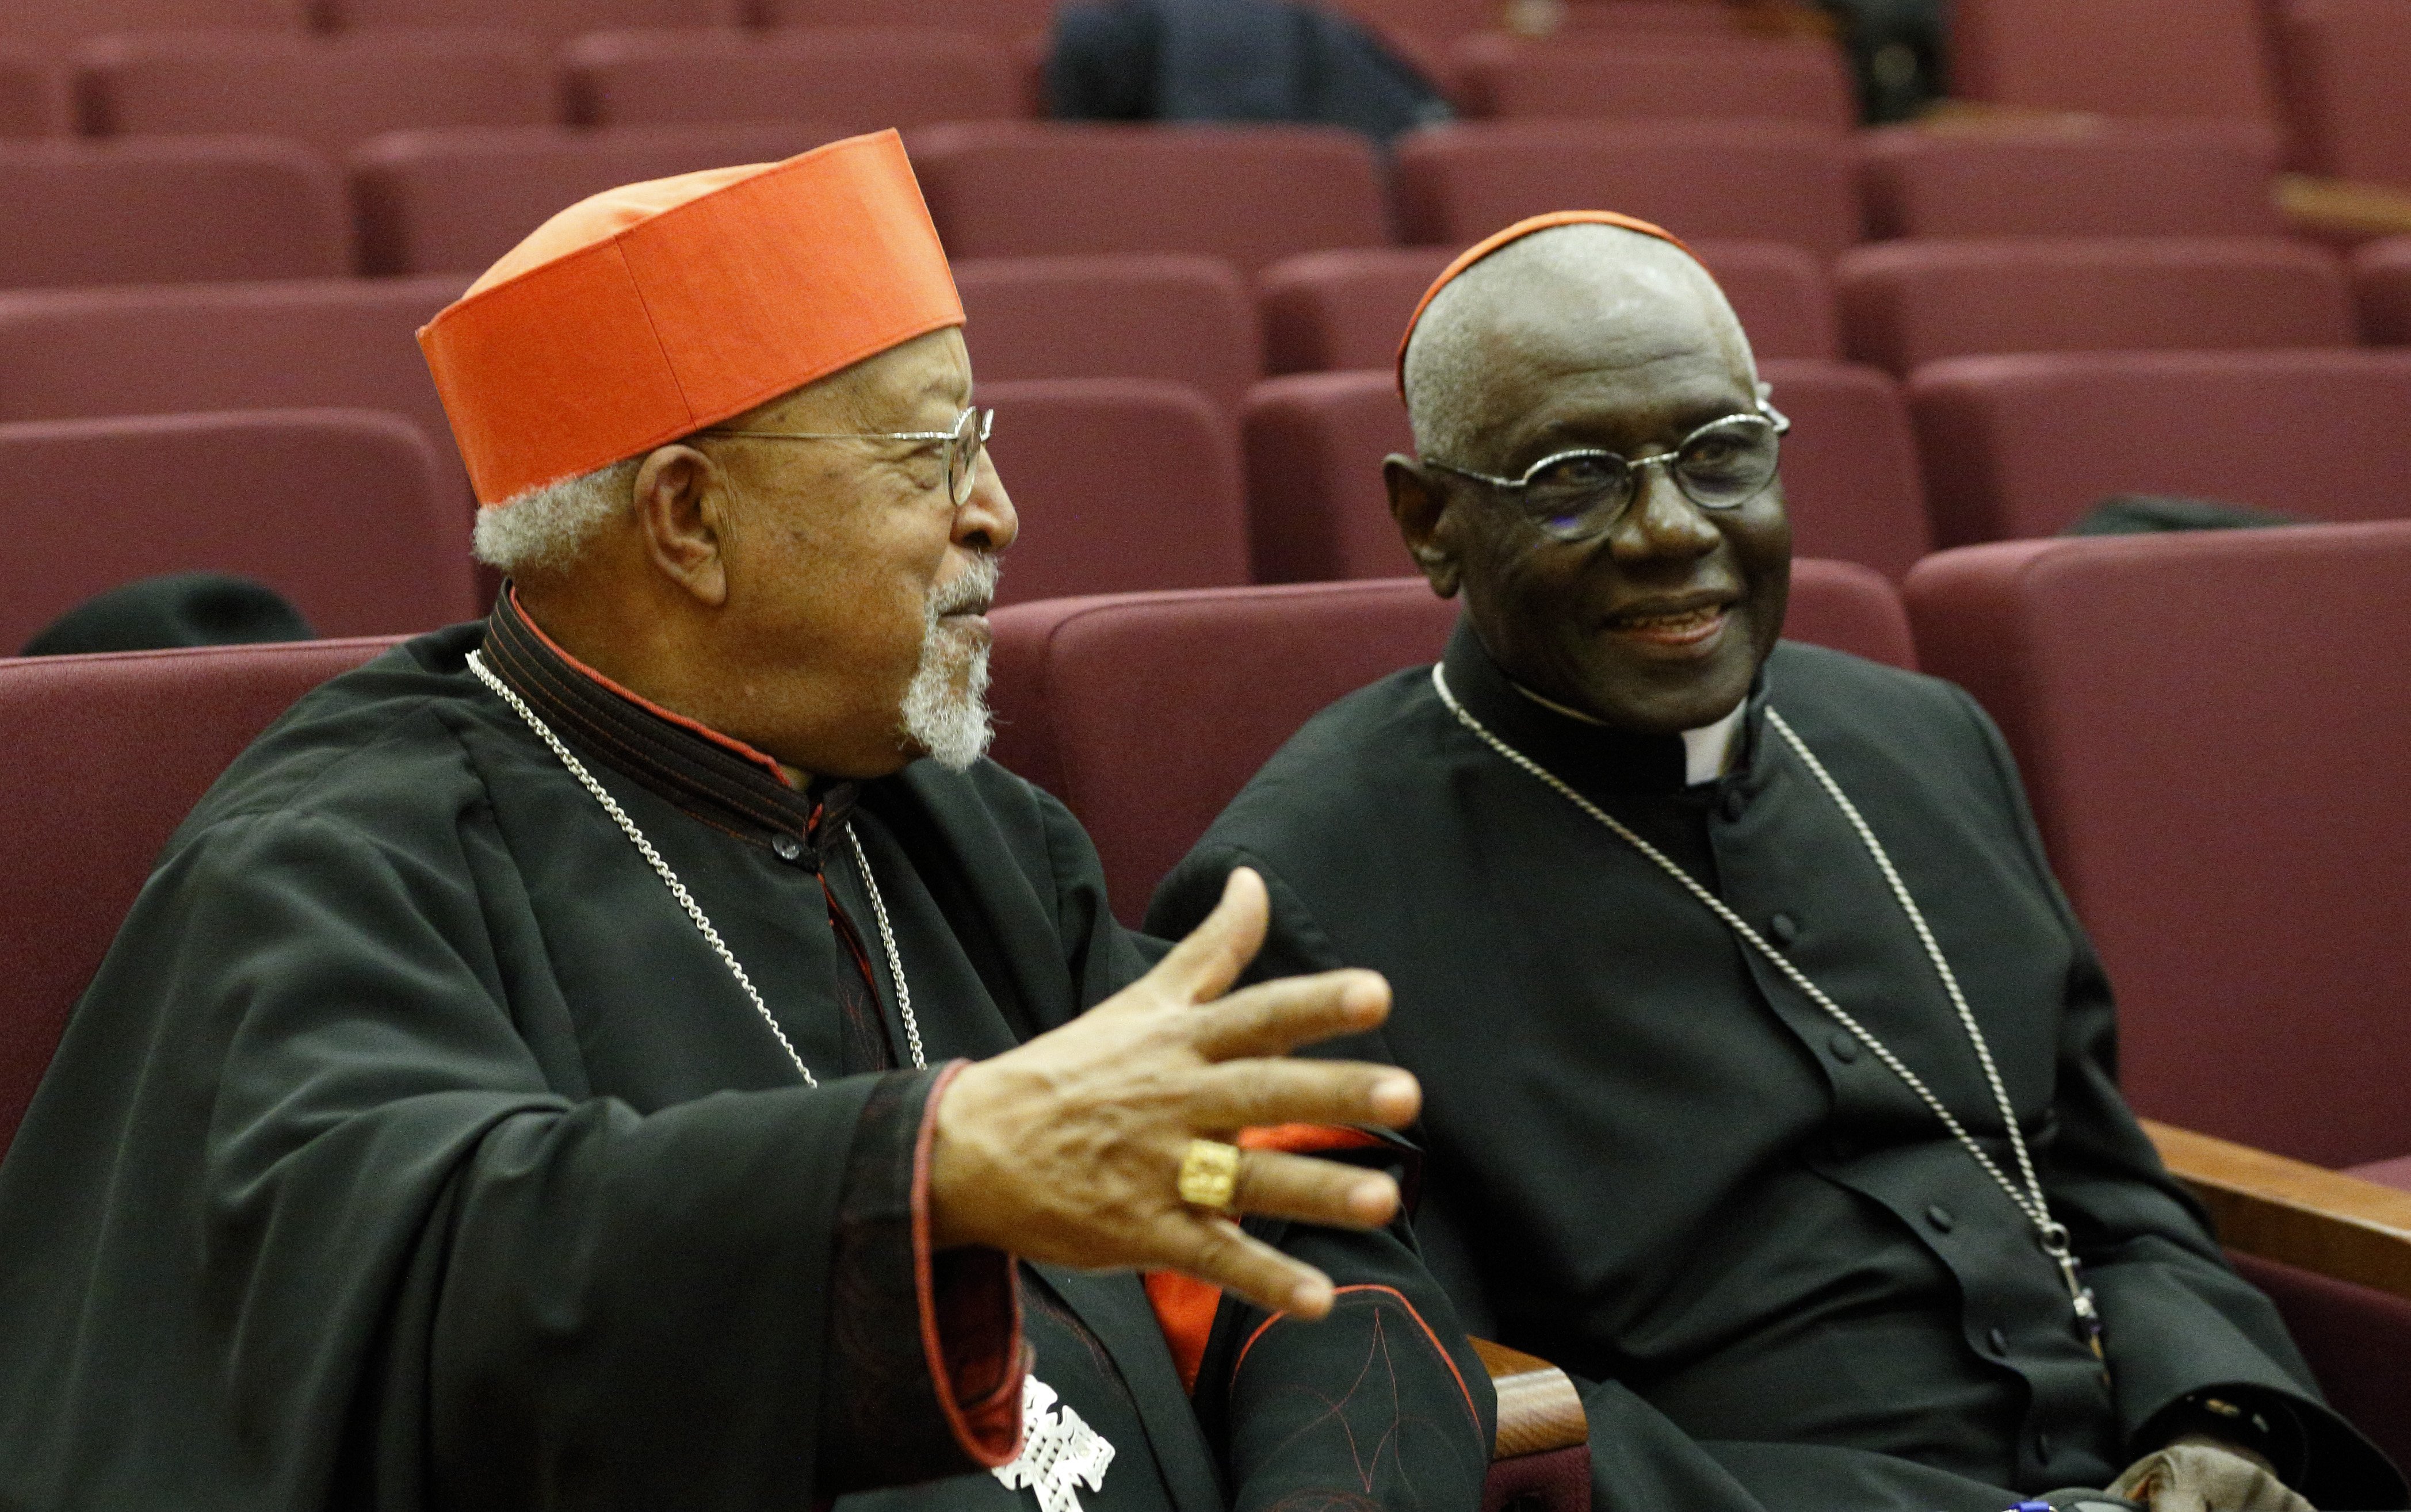 Cardinal Berhaneyesus Souraphiel of Addis Ababa, Ethiopia, and Cardinal Robert Sarah, talk during a meeting hosted by the Vatican Congregation for Eastern Churches in Rome Feb. 16, 2022. (CNS photo/Paul Haring)